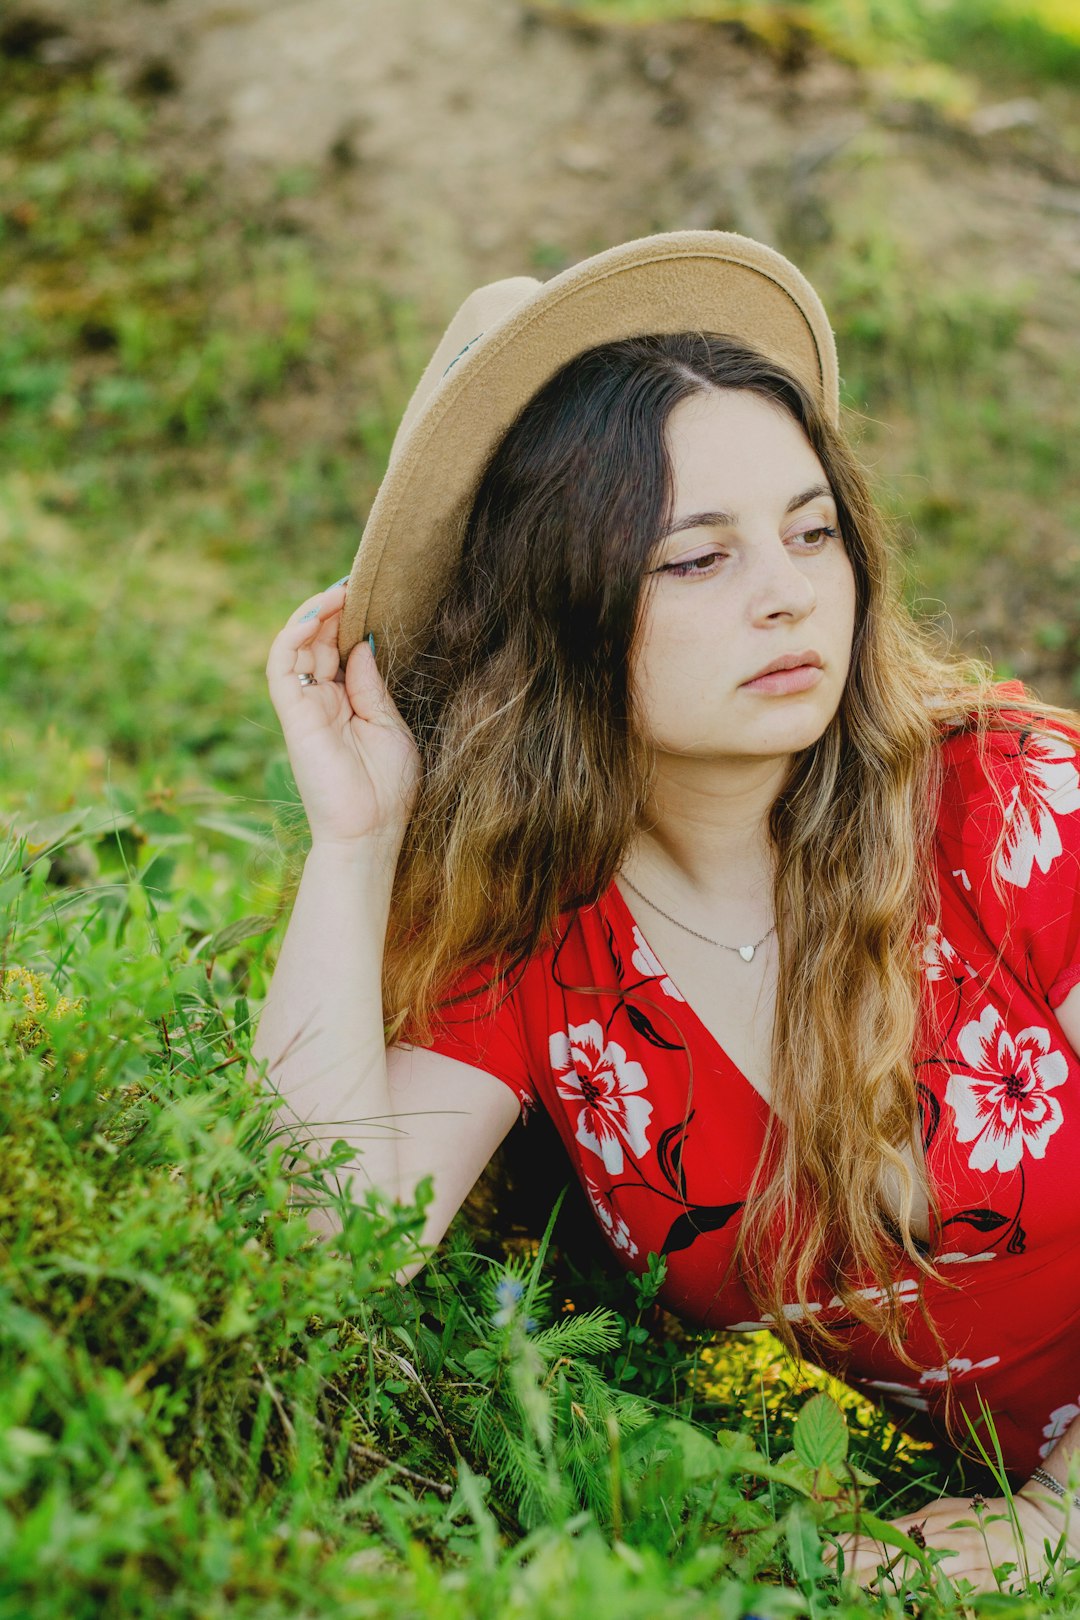 woman in red and white floral shirt wearing brown hat lying on green grass during daytime